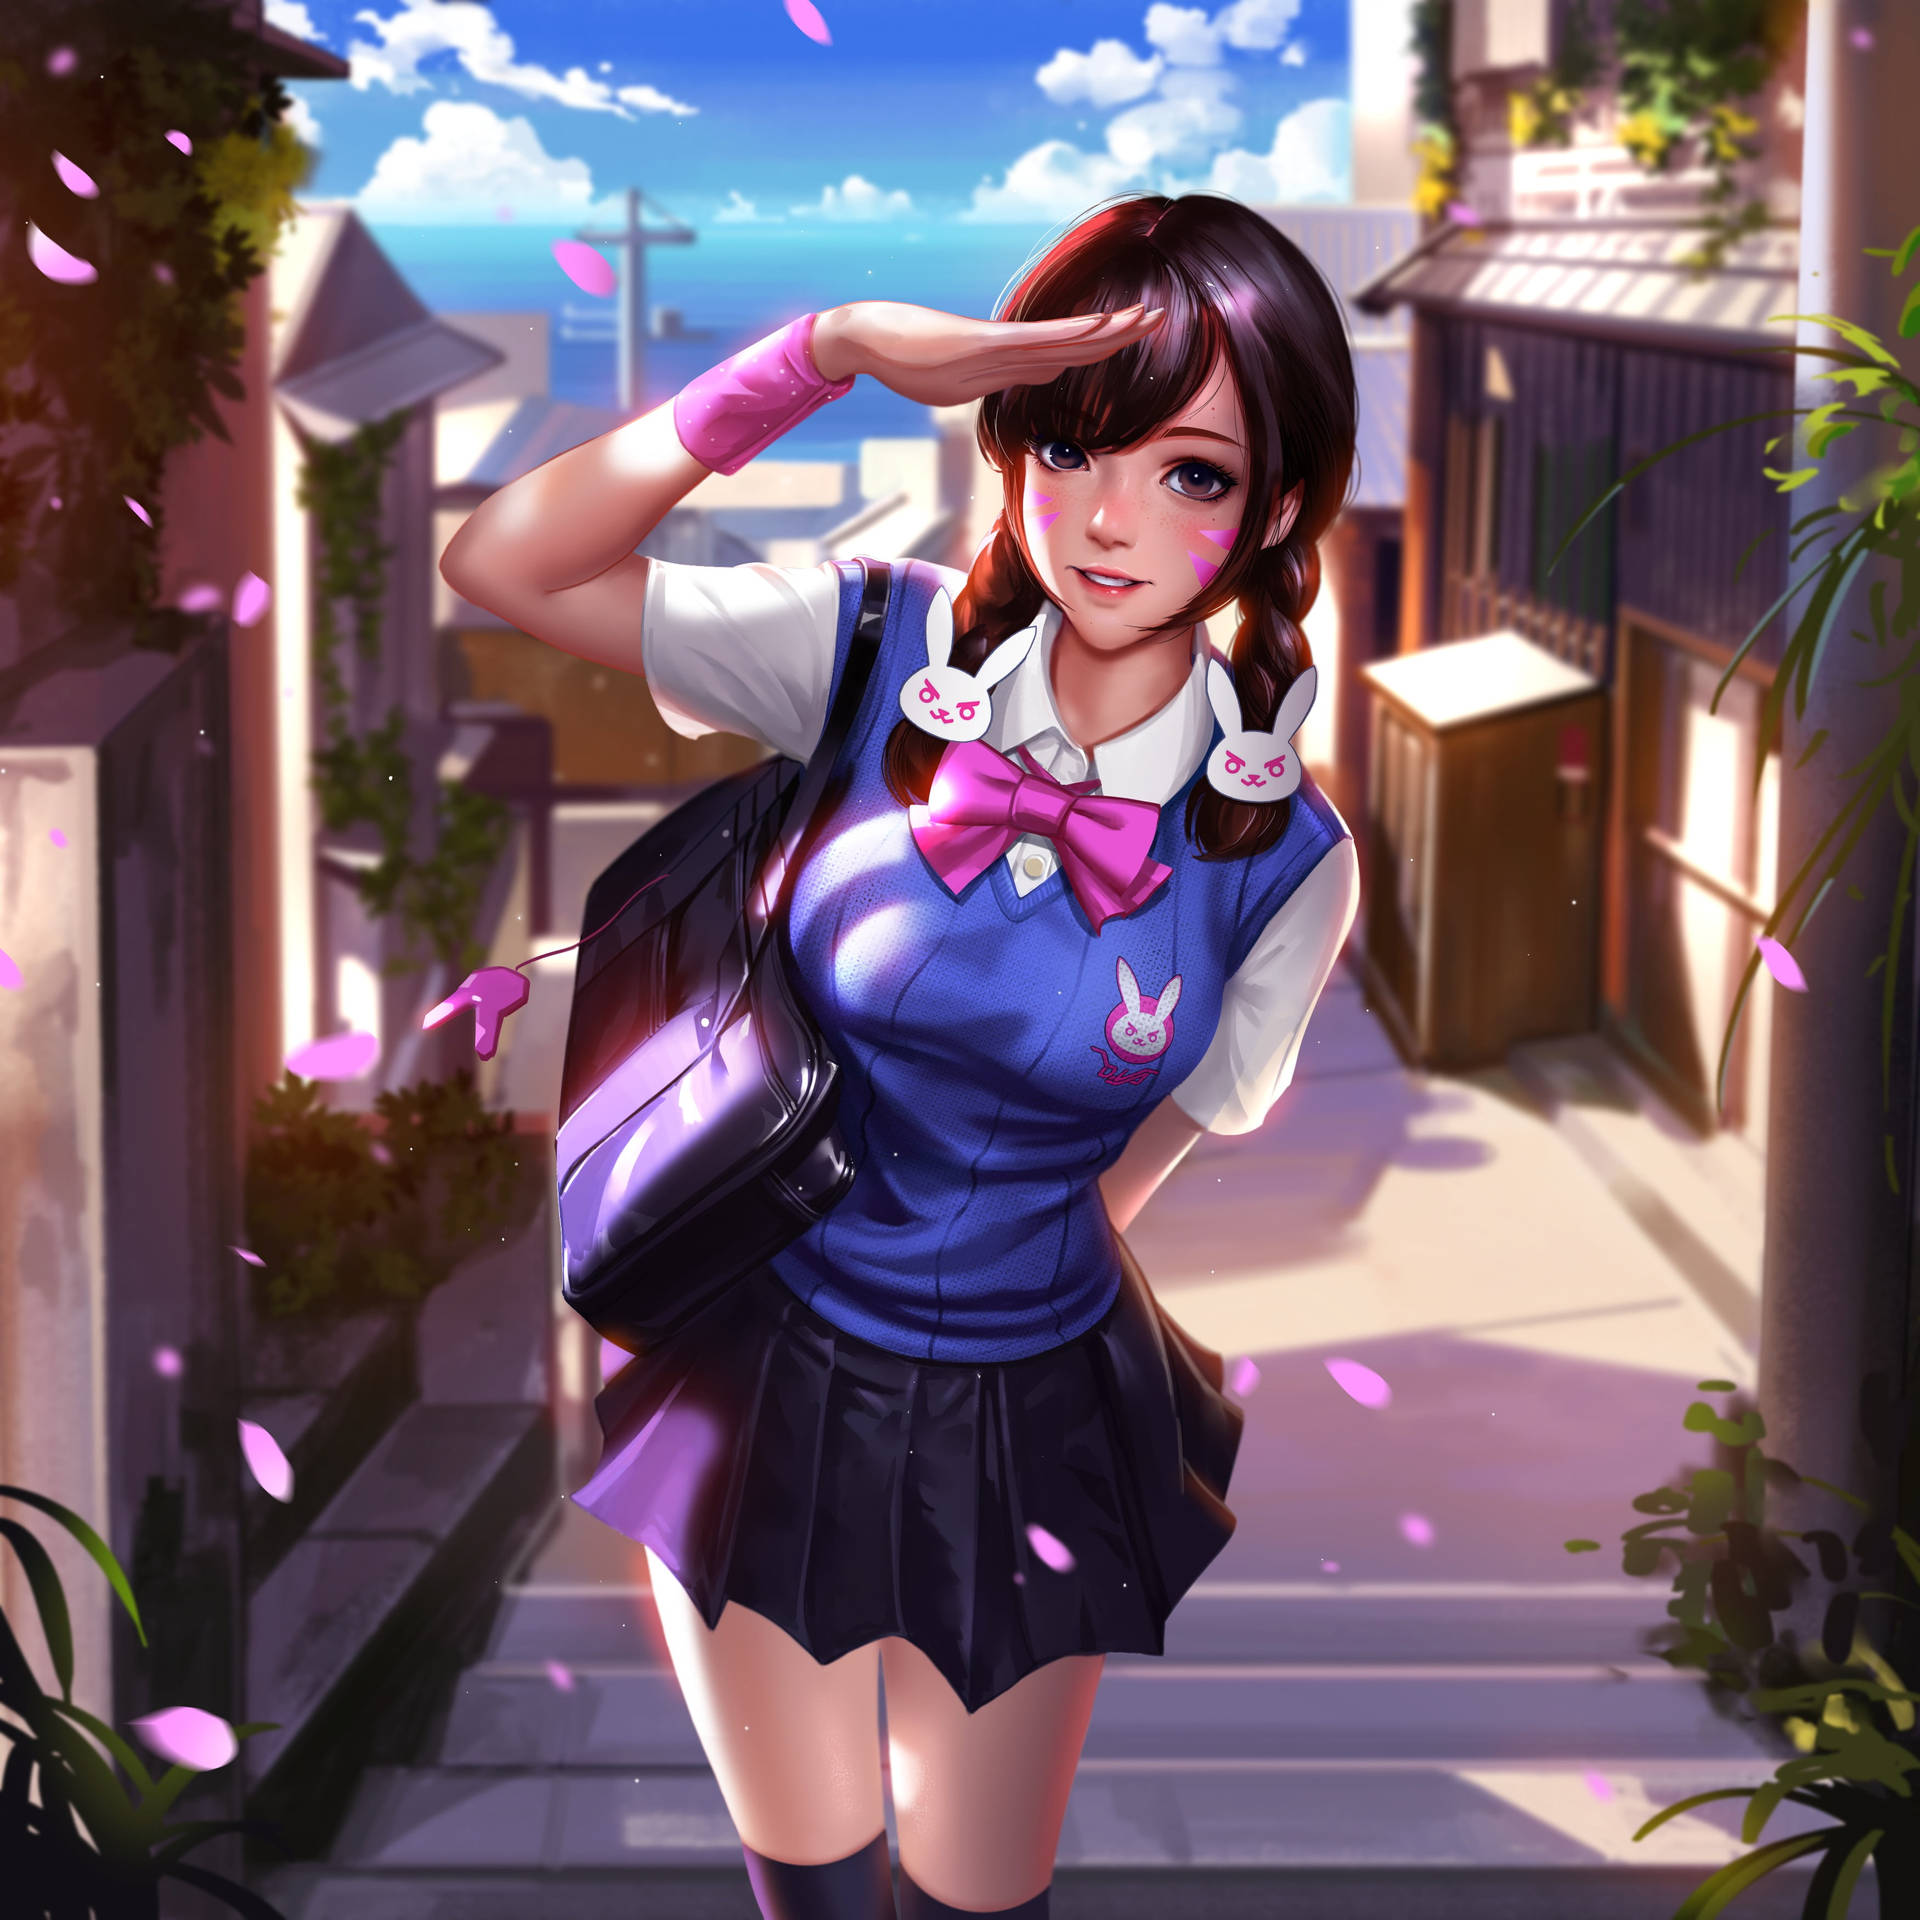 Animated Girl In Uniform Background